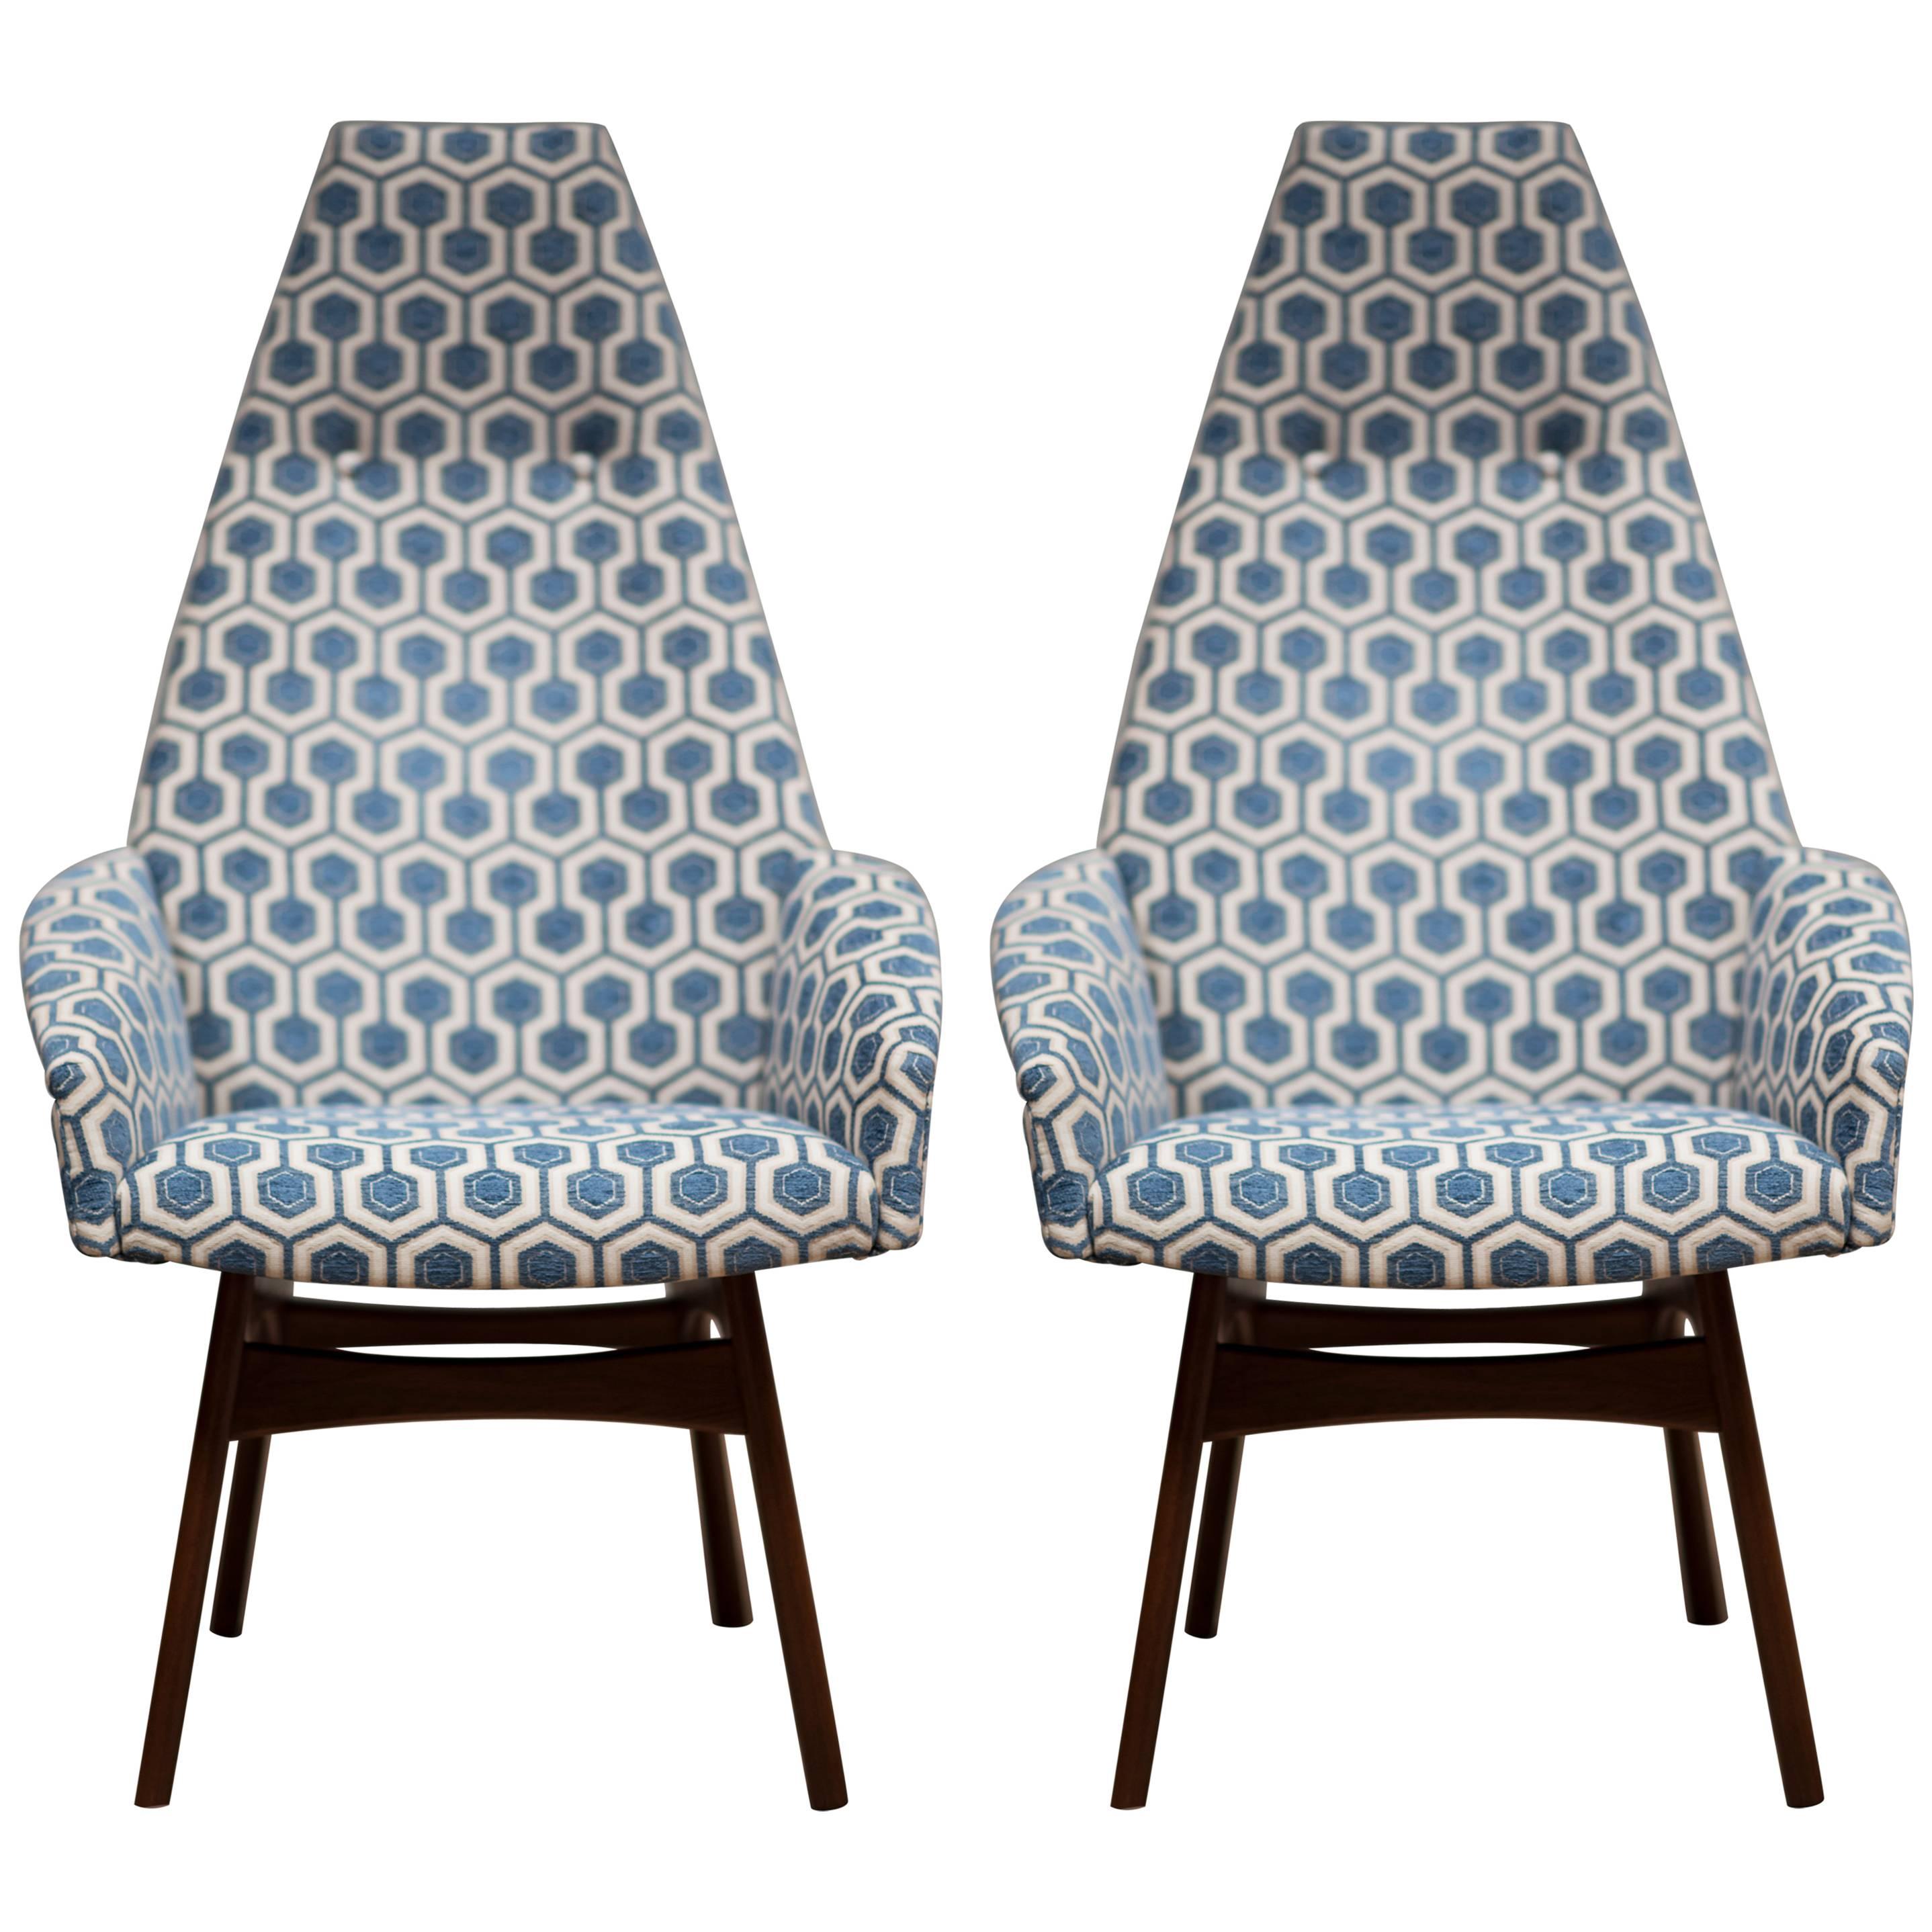 Pair of Adrian Pearsall High-Back Armchairs